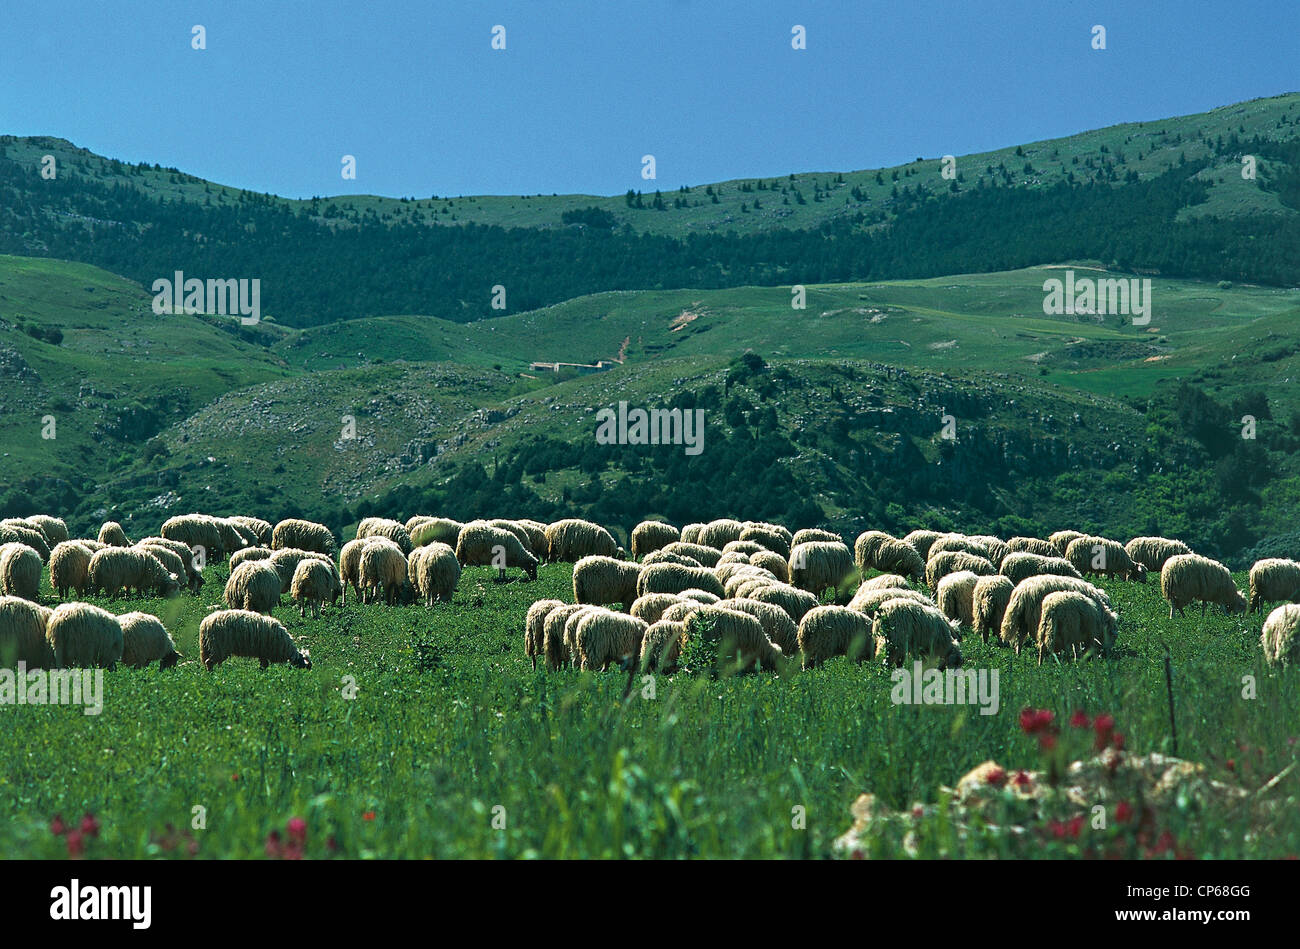 Sicily - Sicani Mountains - Greater St. Stephen's Quisquina (Ag). Sheep grazing. Stock Photo